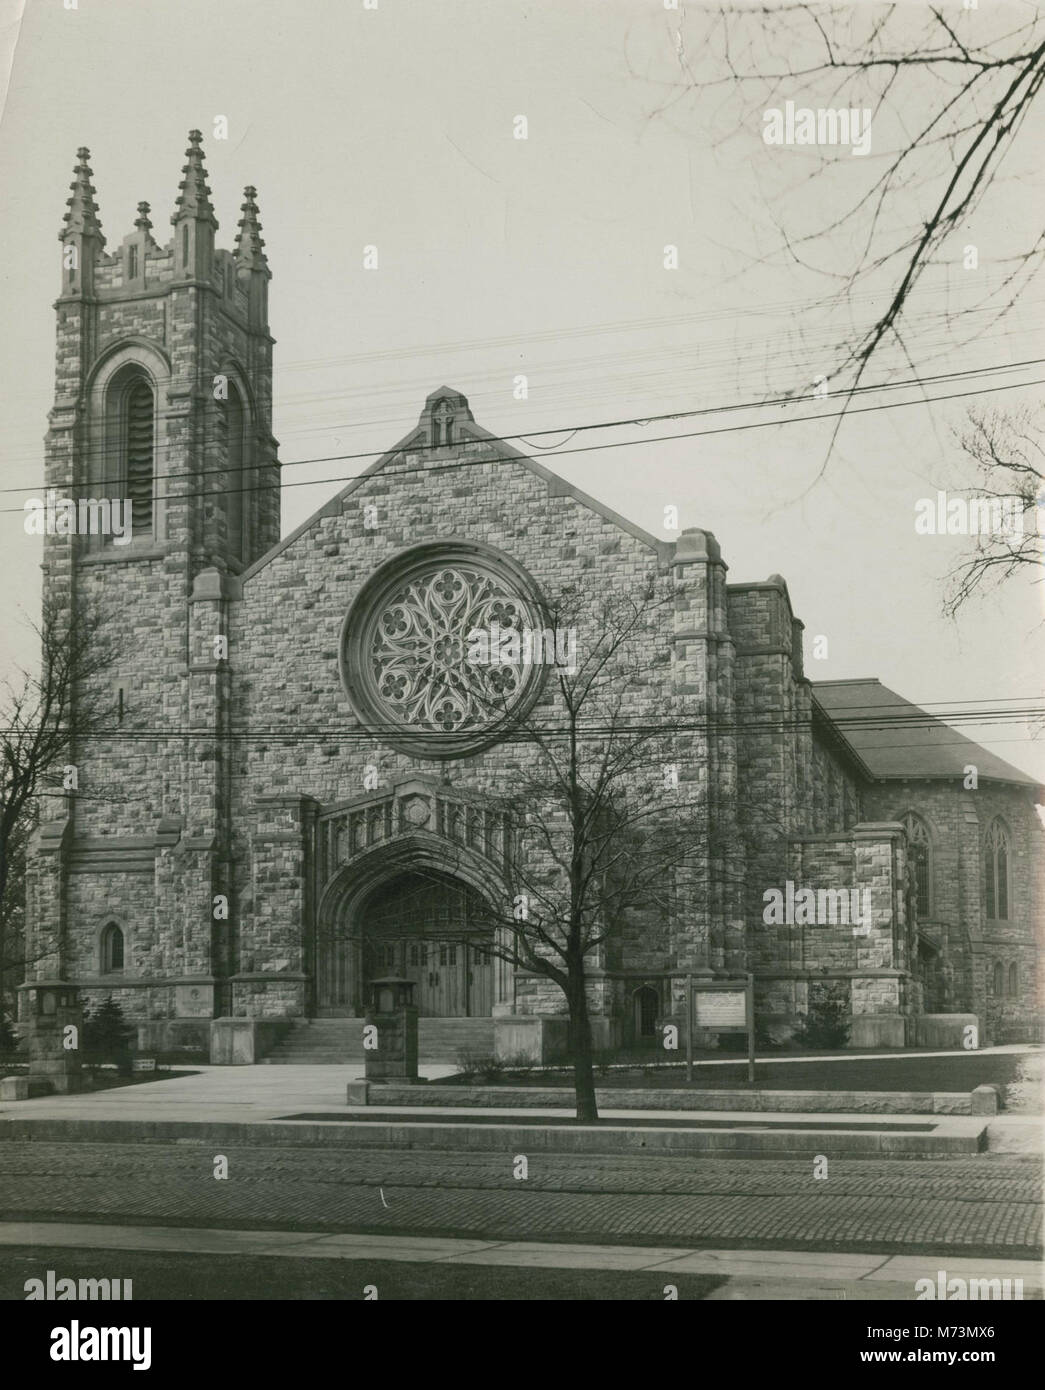 First Congregational Church, Oak Park, Illinois, February 12, 1919 (NBY 792) Stock Photo